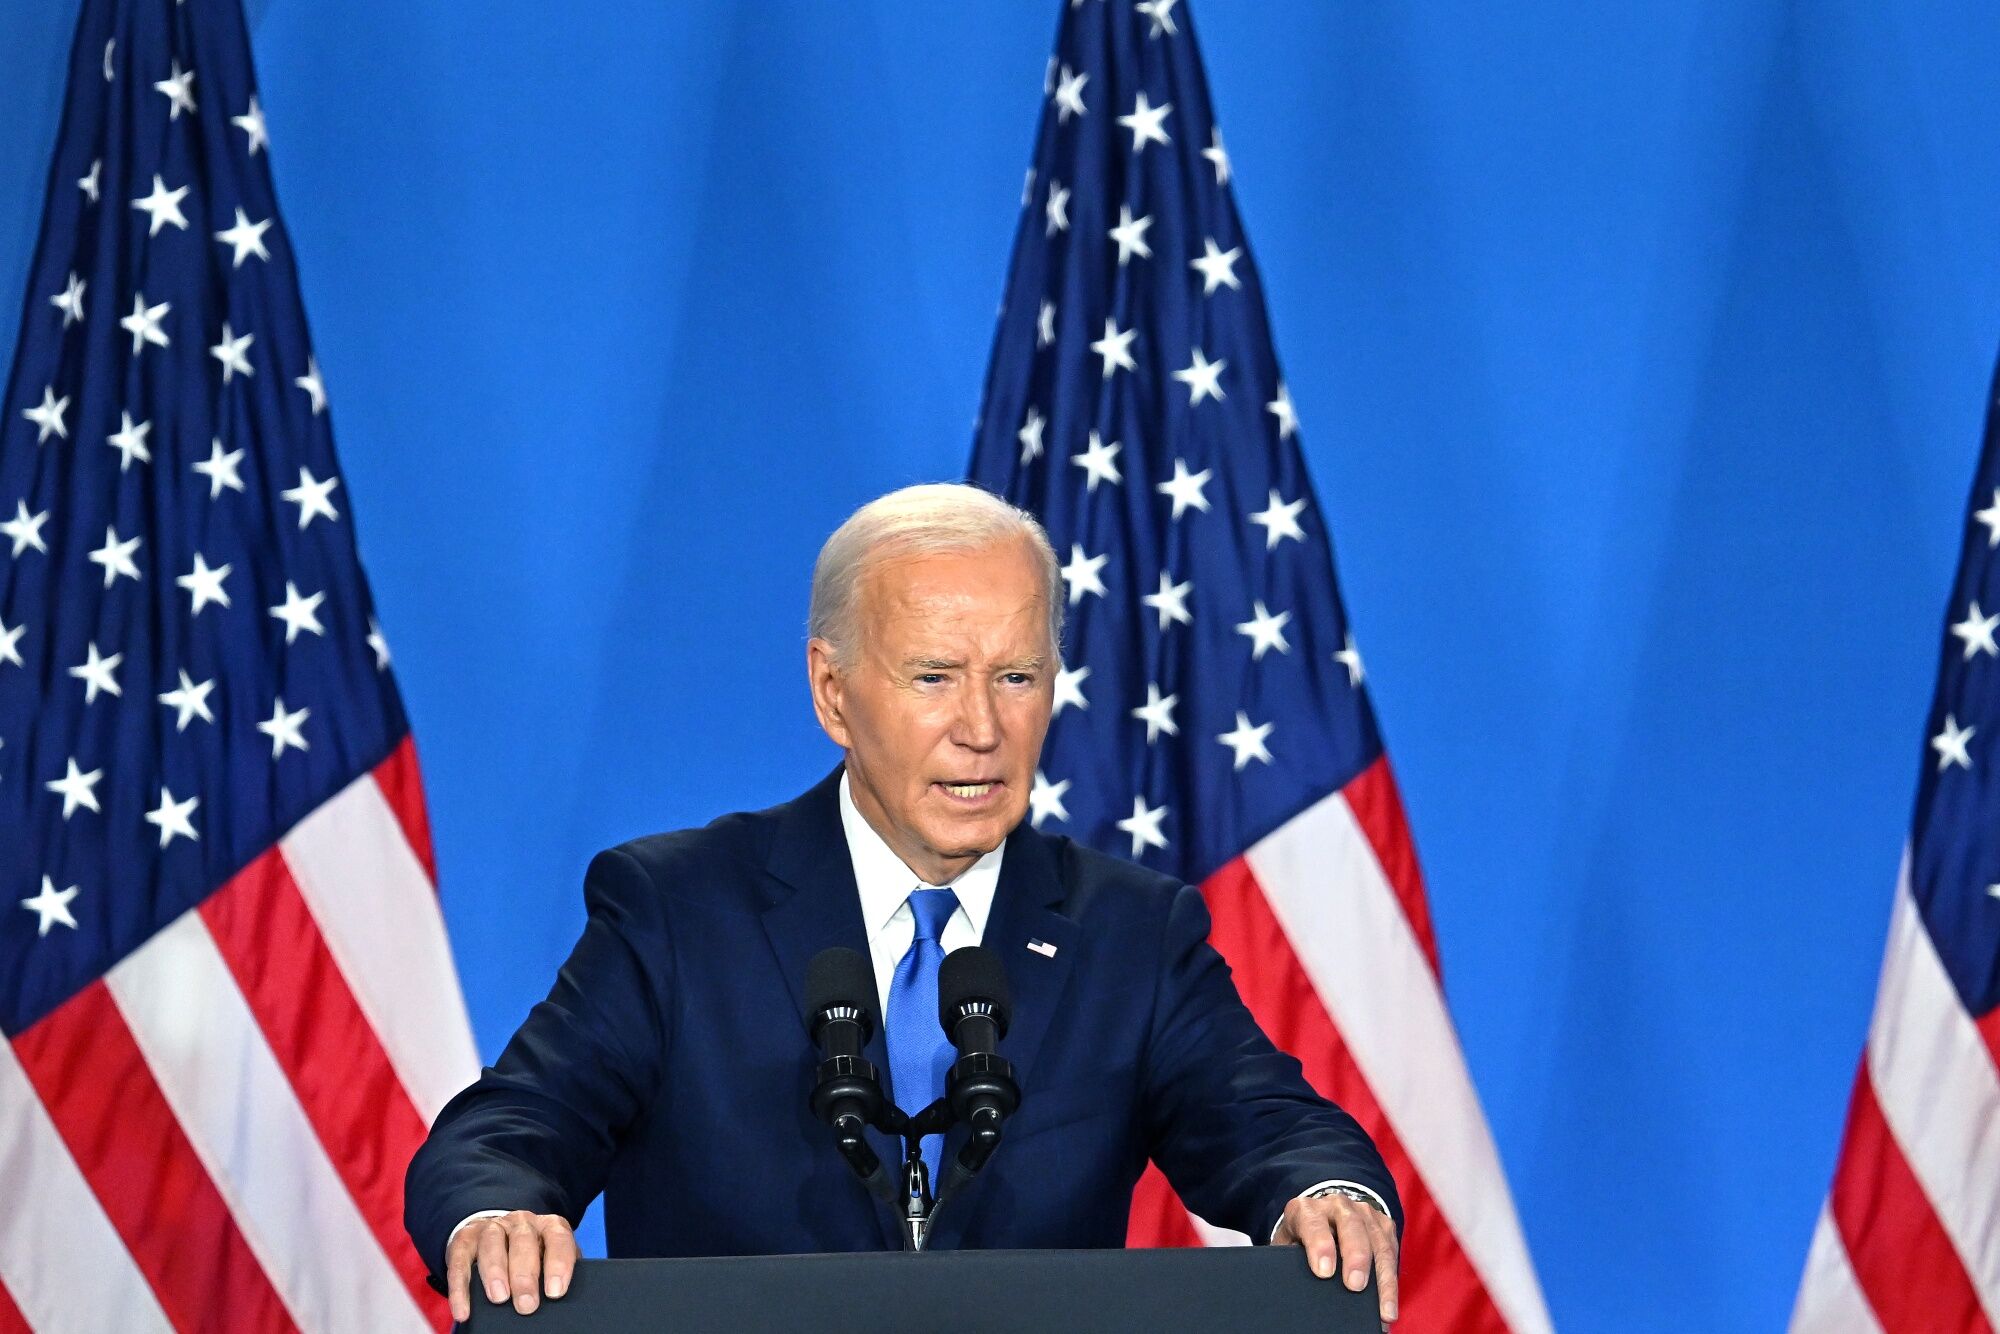 ‘I'm in good shape': Biden takes questions about his mental and physical fitness